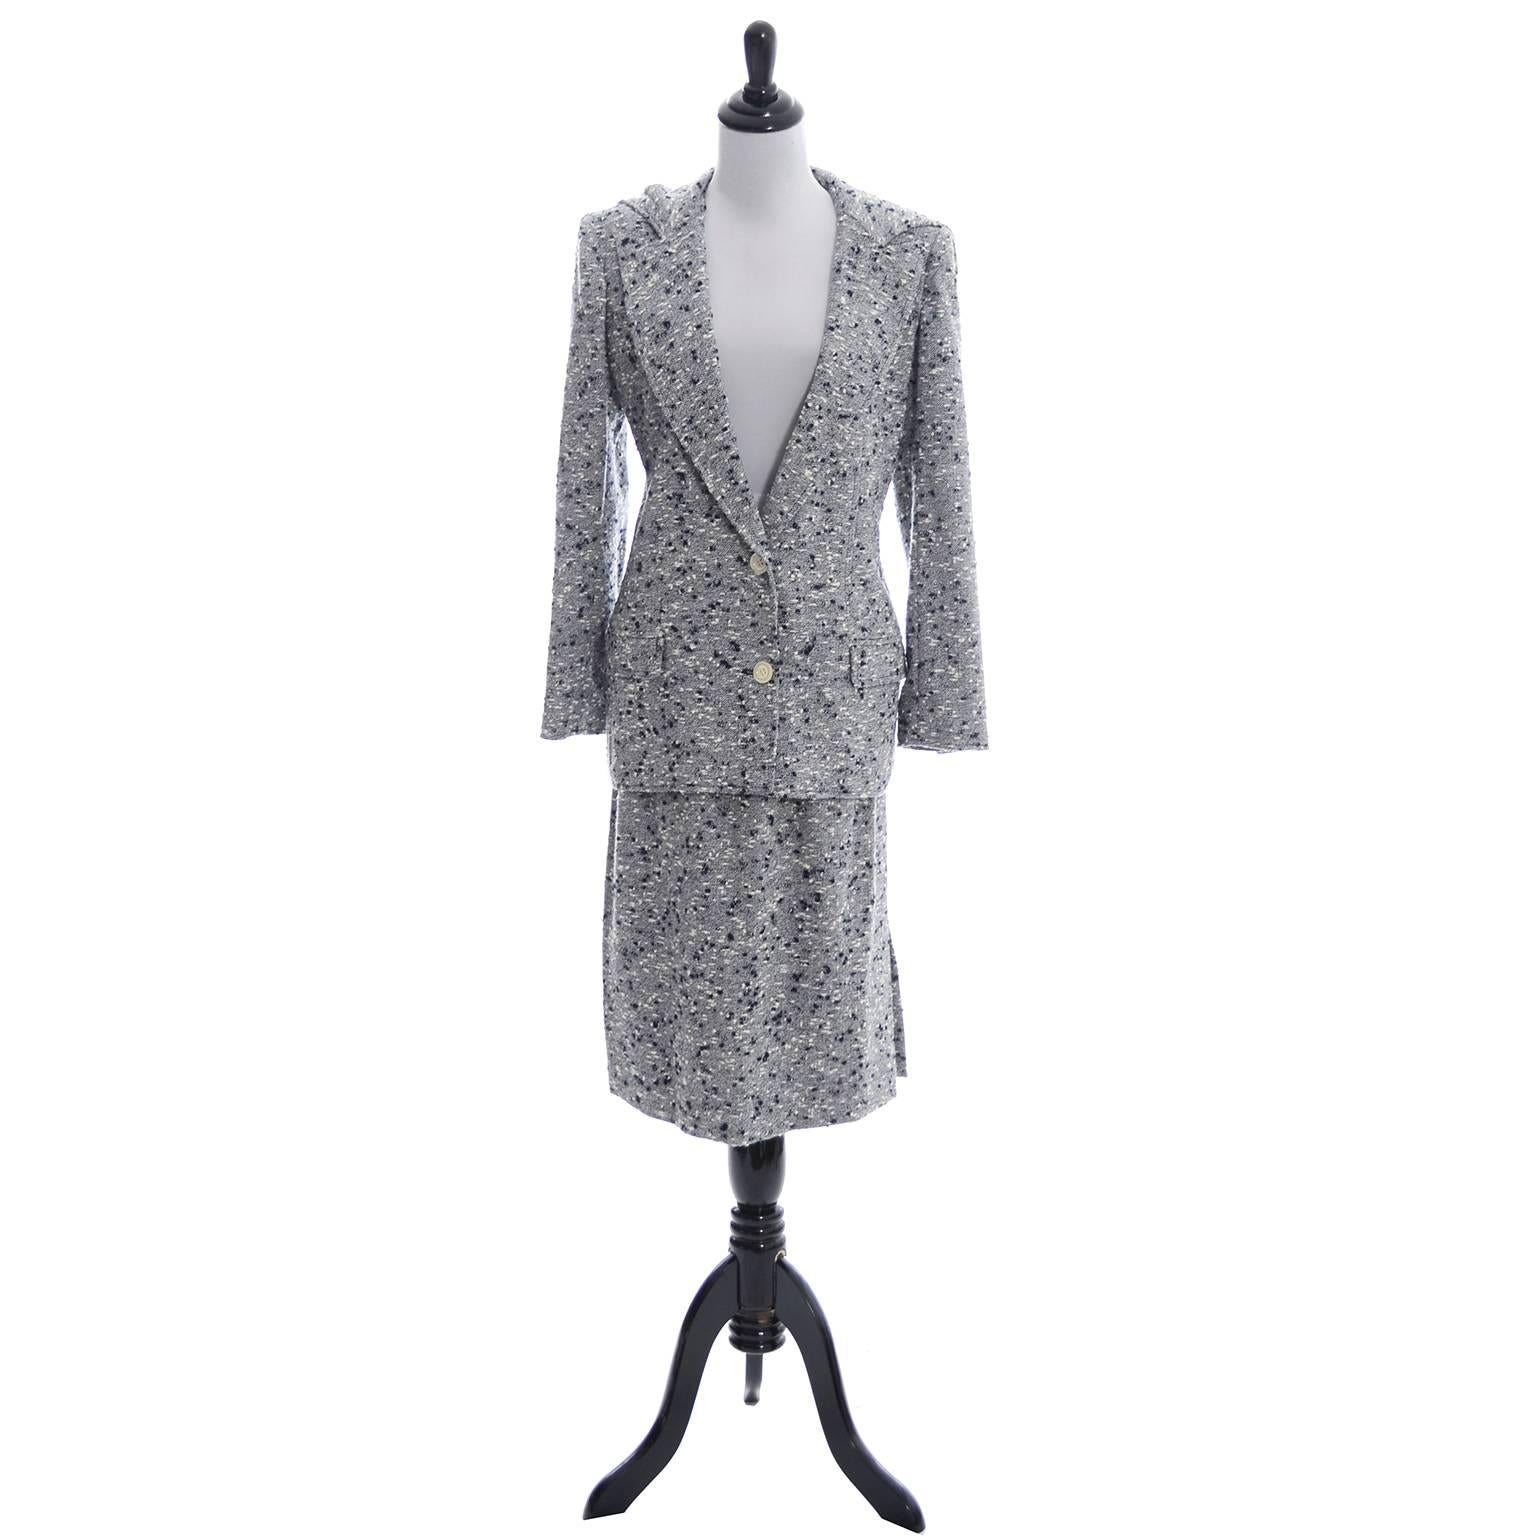 This is a fabulous Valentino vintage skirt suit in a beautiful navy blue and white confetti boucle. Both pieces are fully lined and the fabulous jacket has a hood.  The skirt has side slit pockets and a side zipper. This outfit comes from an estate